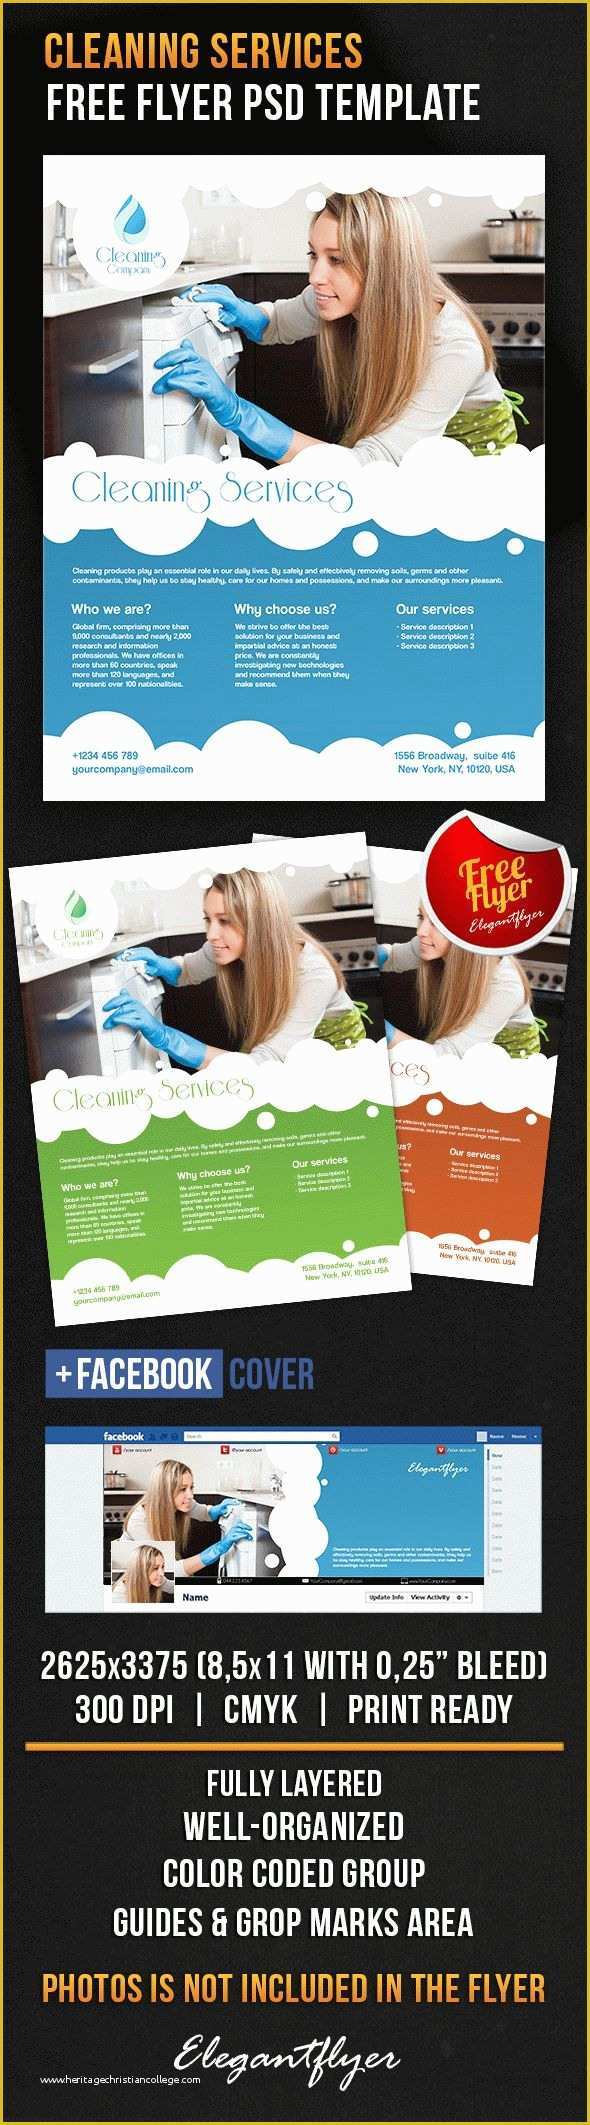 Cleaning Flyers Templates Free Of Cleaning Services – Free Flyer Psd Template – by Elegantflyer